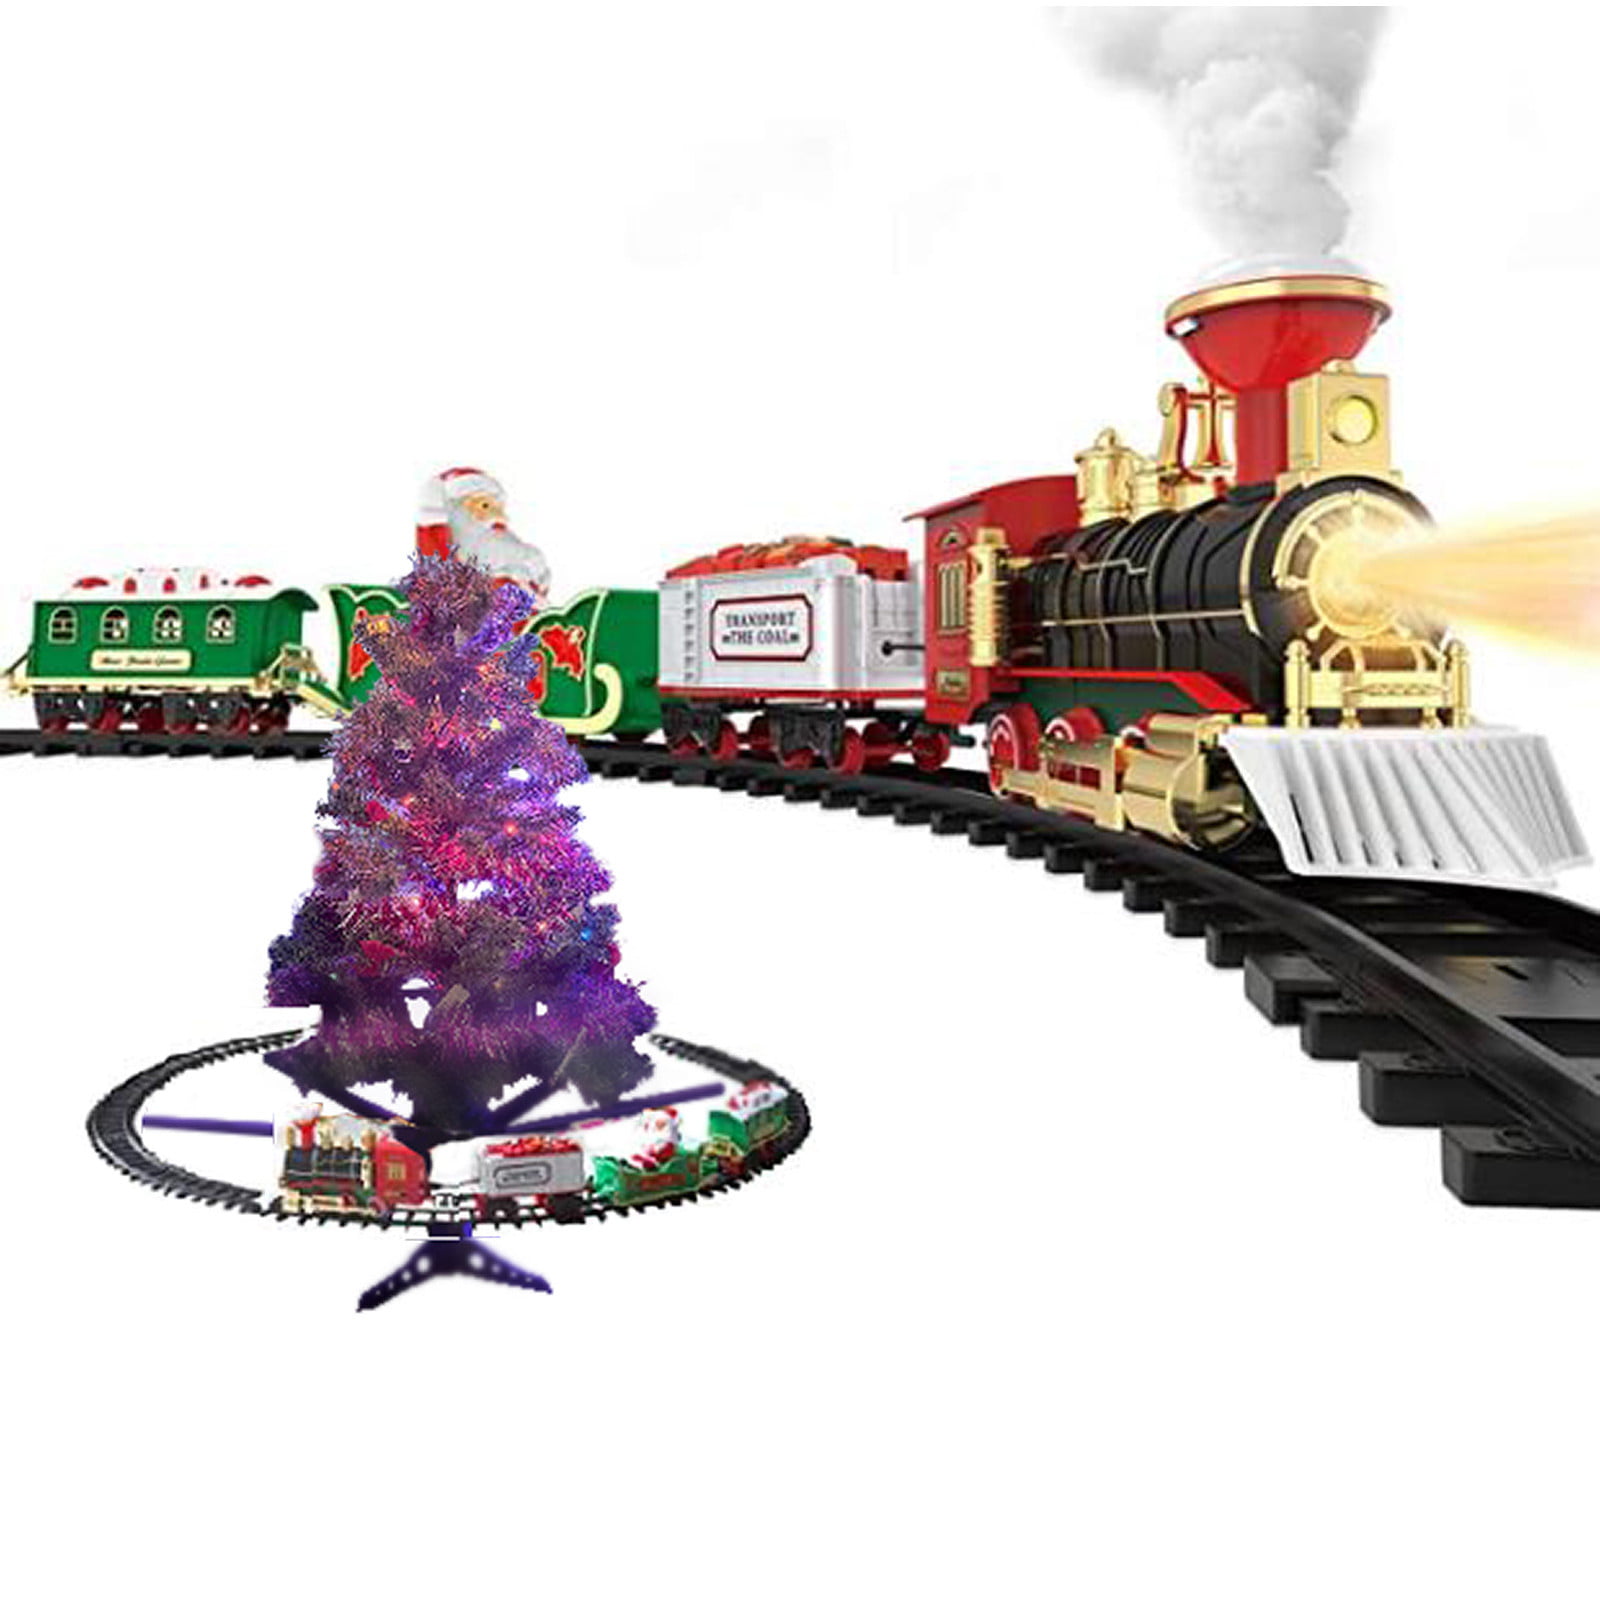 Premier Train Set Battery Operated Christmas Decoration AC151224 for sale online 